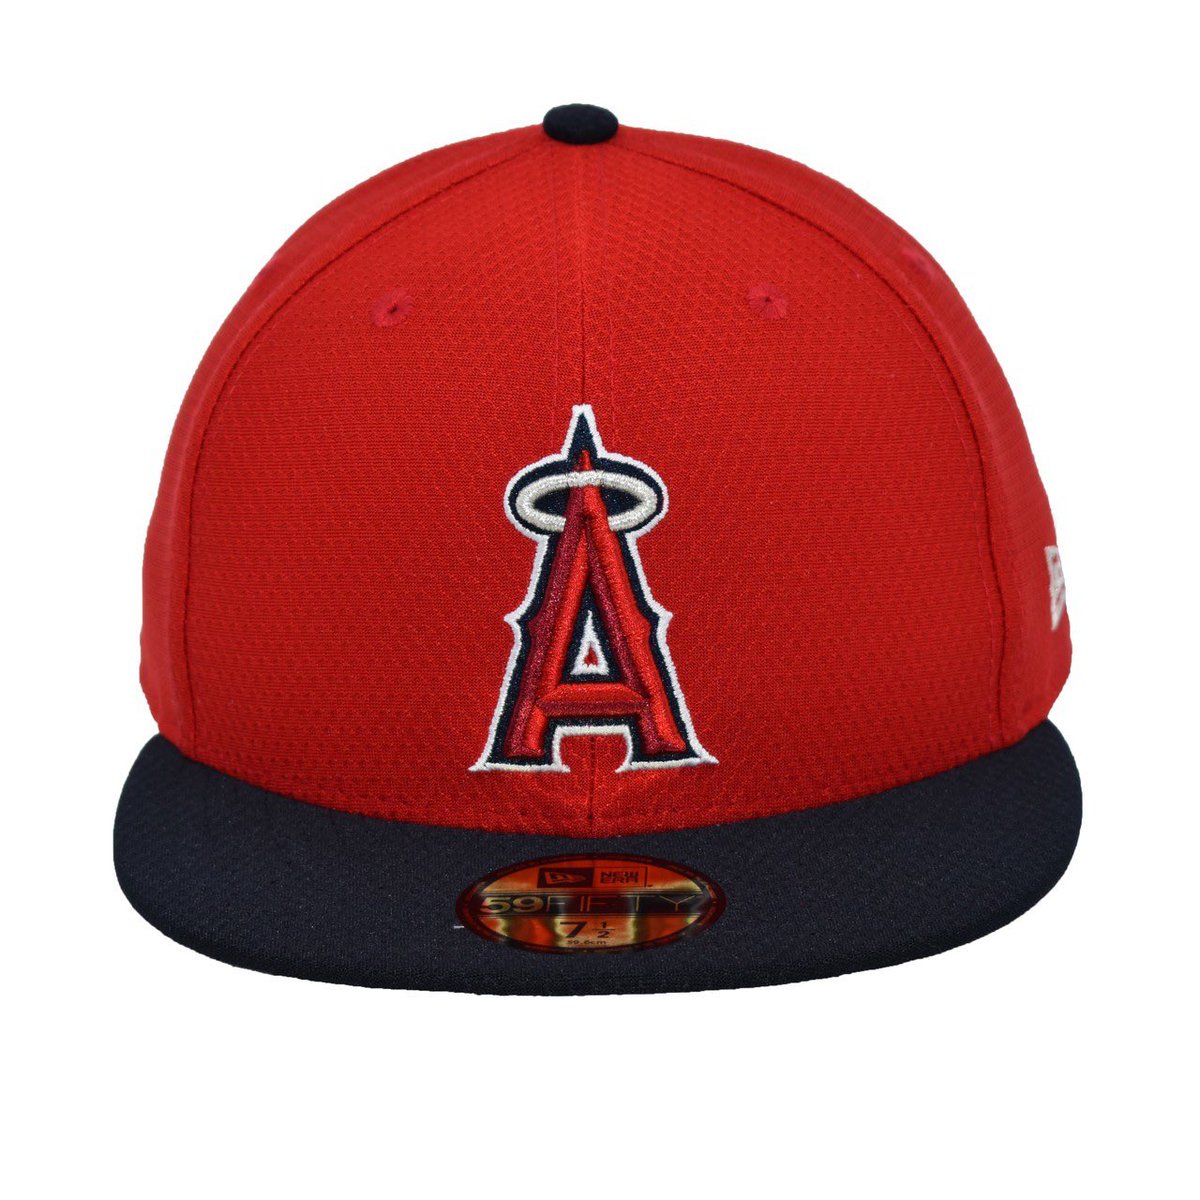 LA Angels Hat-Most seen on El Segundo Blvd. and Figueroa St. -they have a bomb Mexican food spot at that intersection, but if you see 3 cats inside with this on, LEAVE.